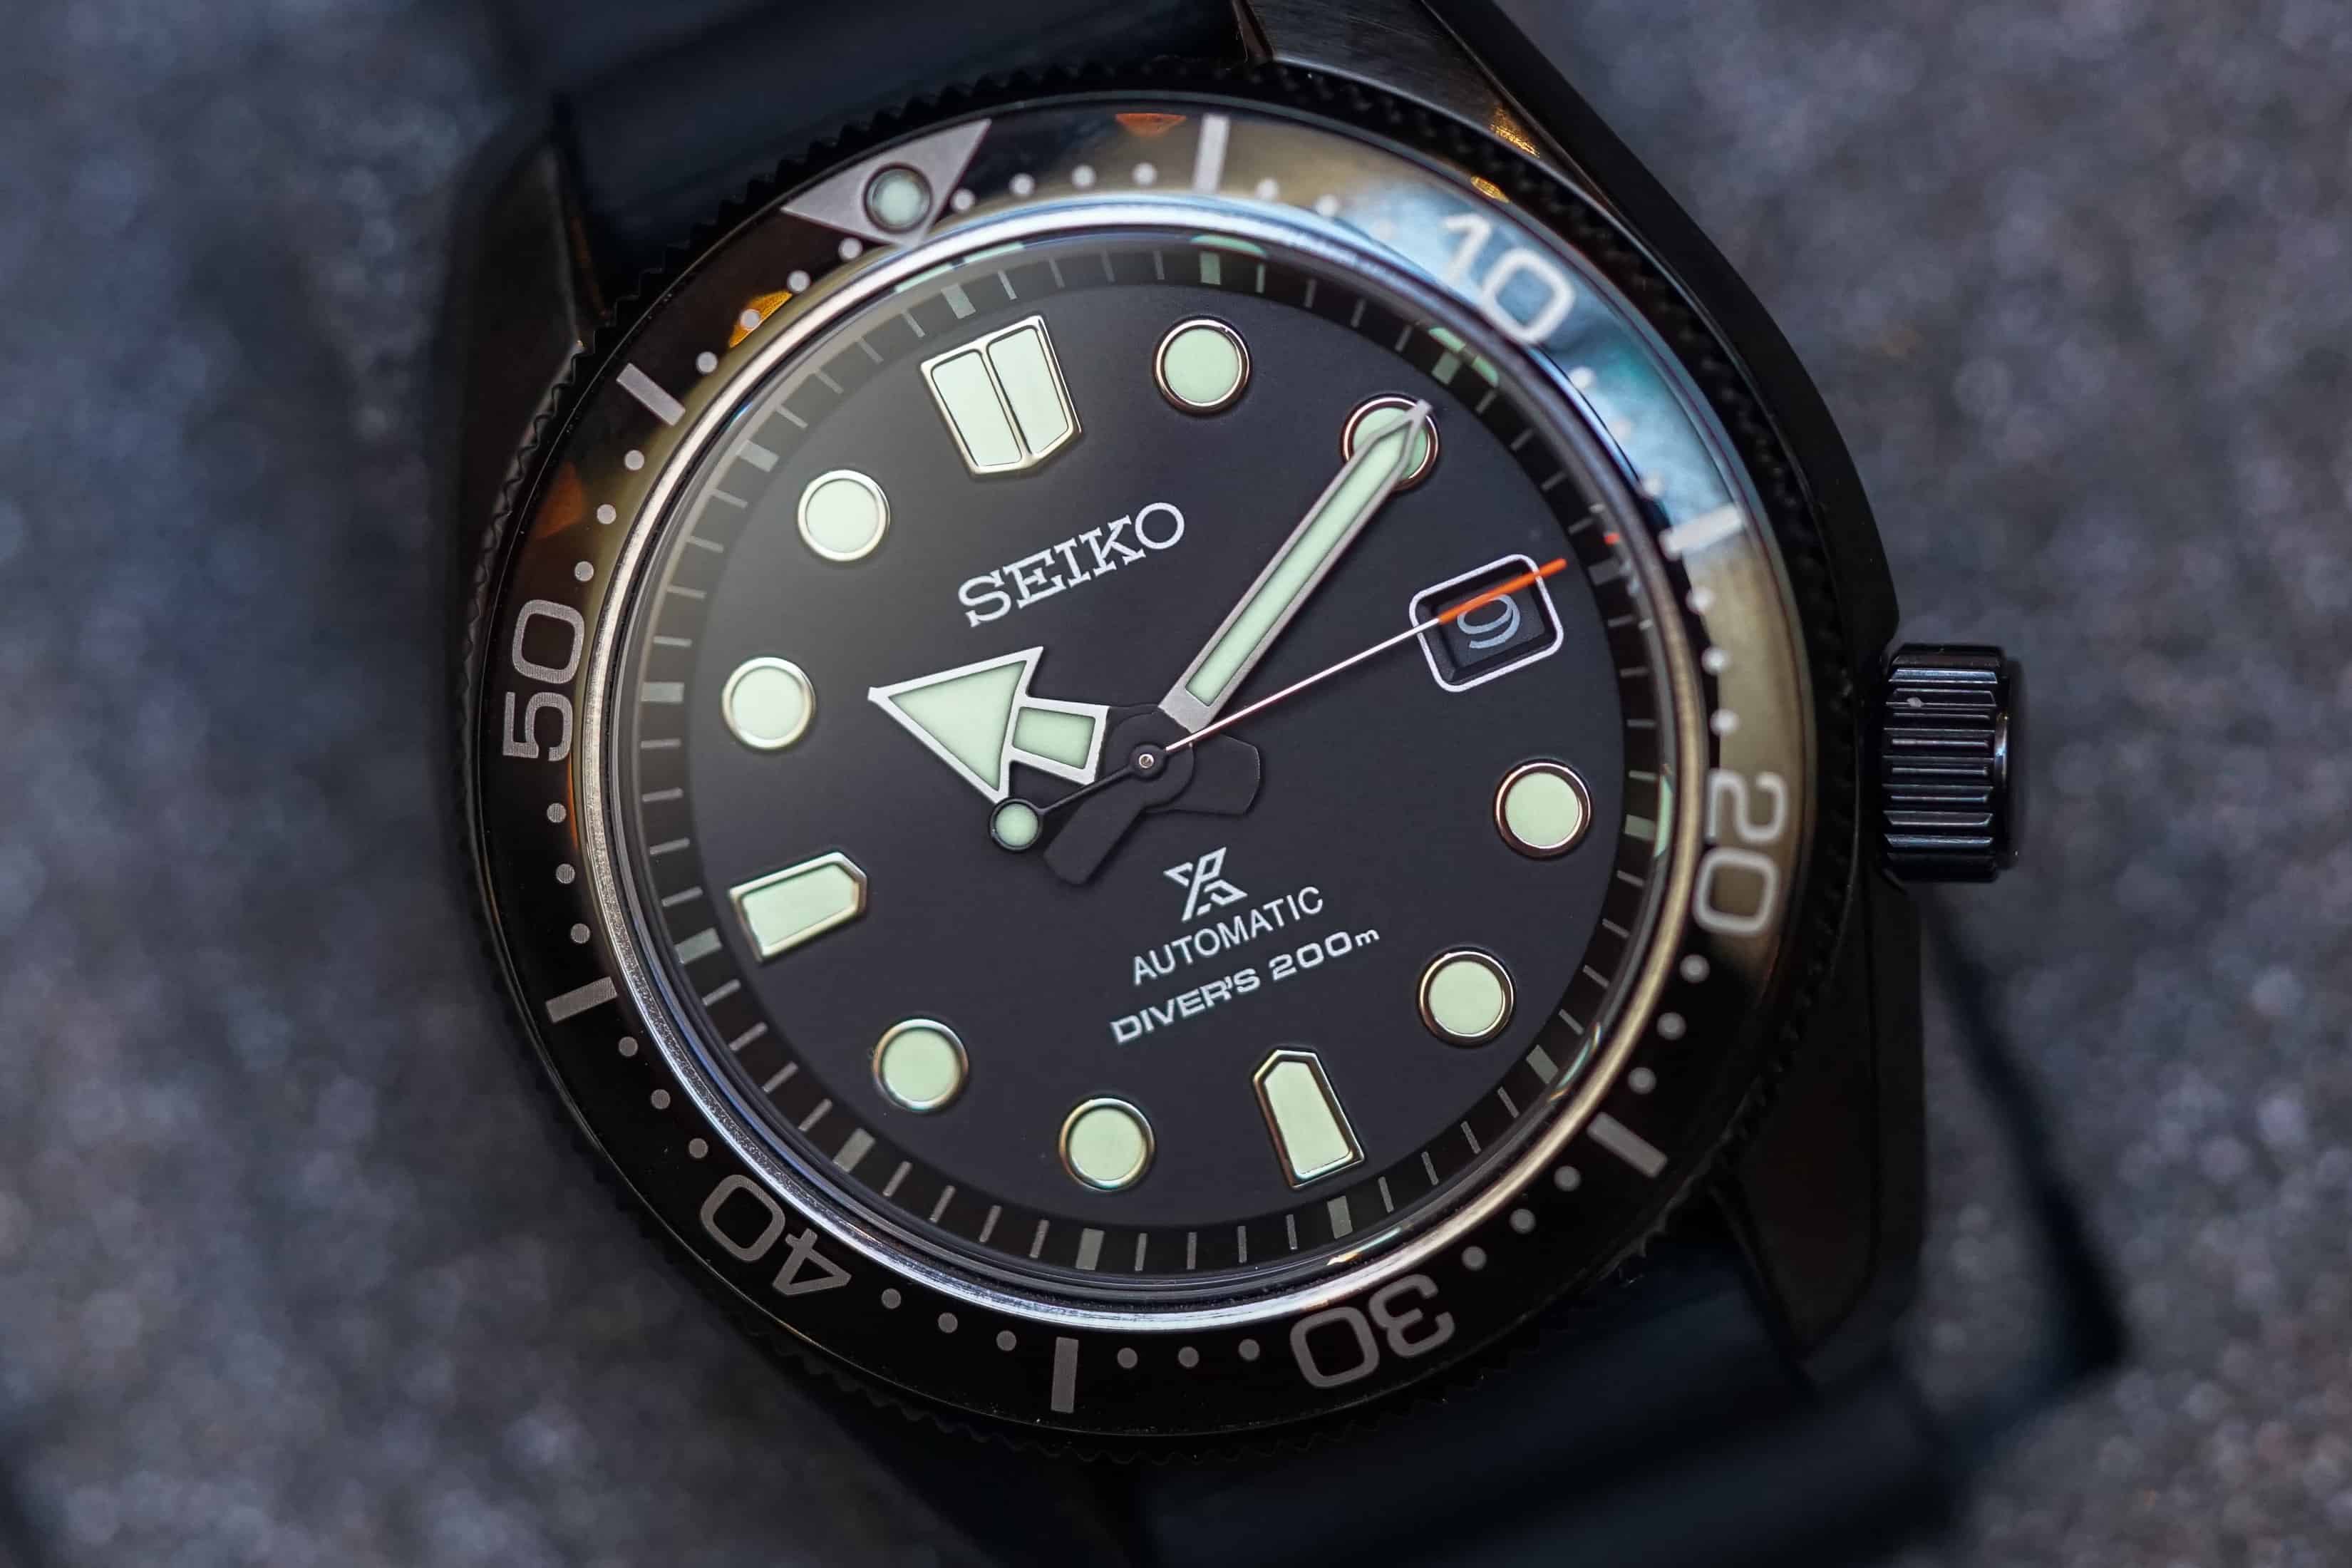 First Look: Topper x Seiko Prospex Diver Ref. SPB107 Limited Edition, Nicknamed the “Topper Ninja”